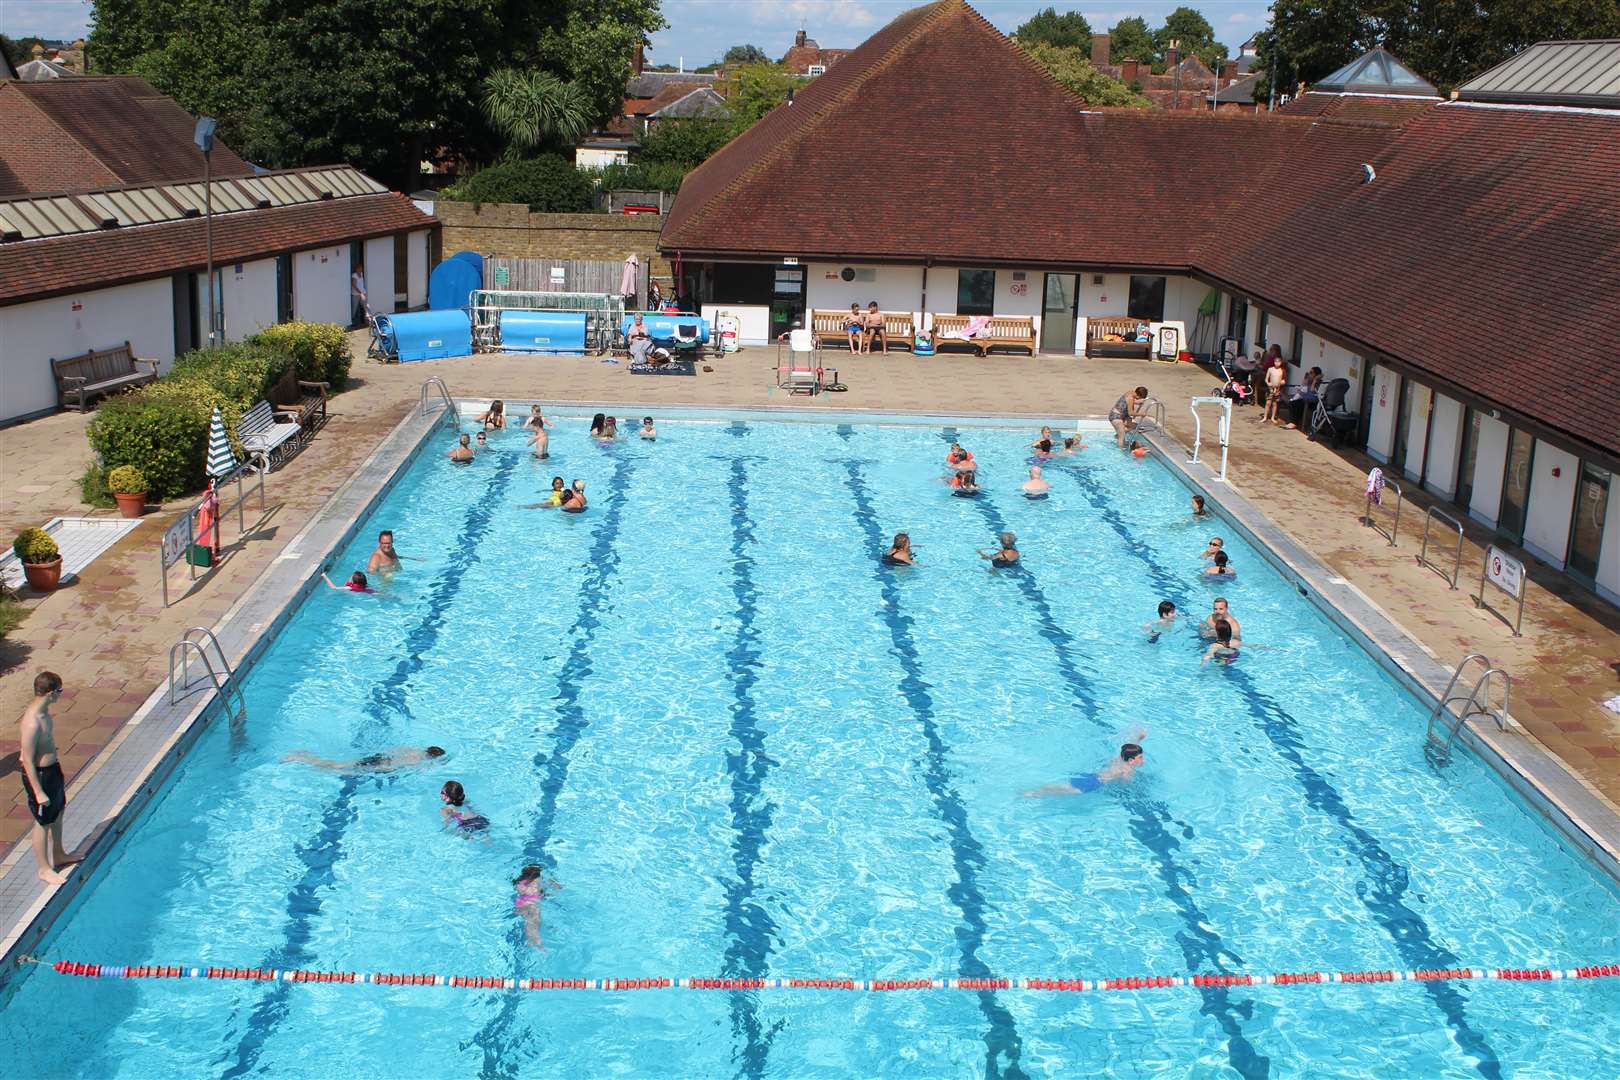 The view of the outdoor pool from the top diving board. Picture: Poppy Boorman/Faversham Pools